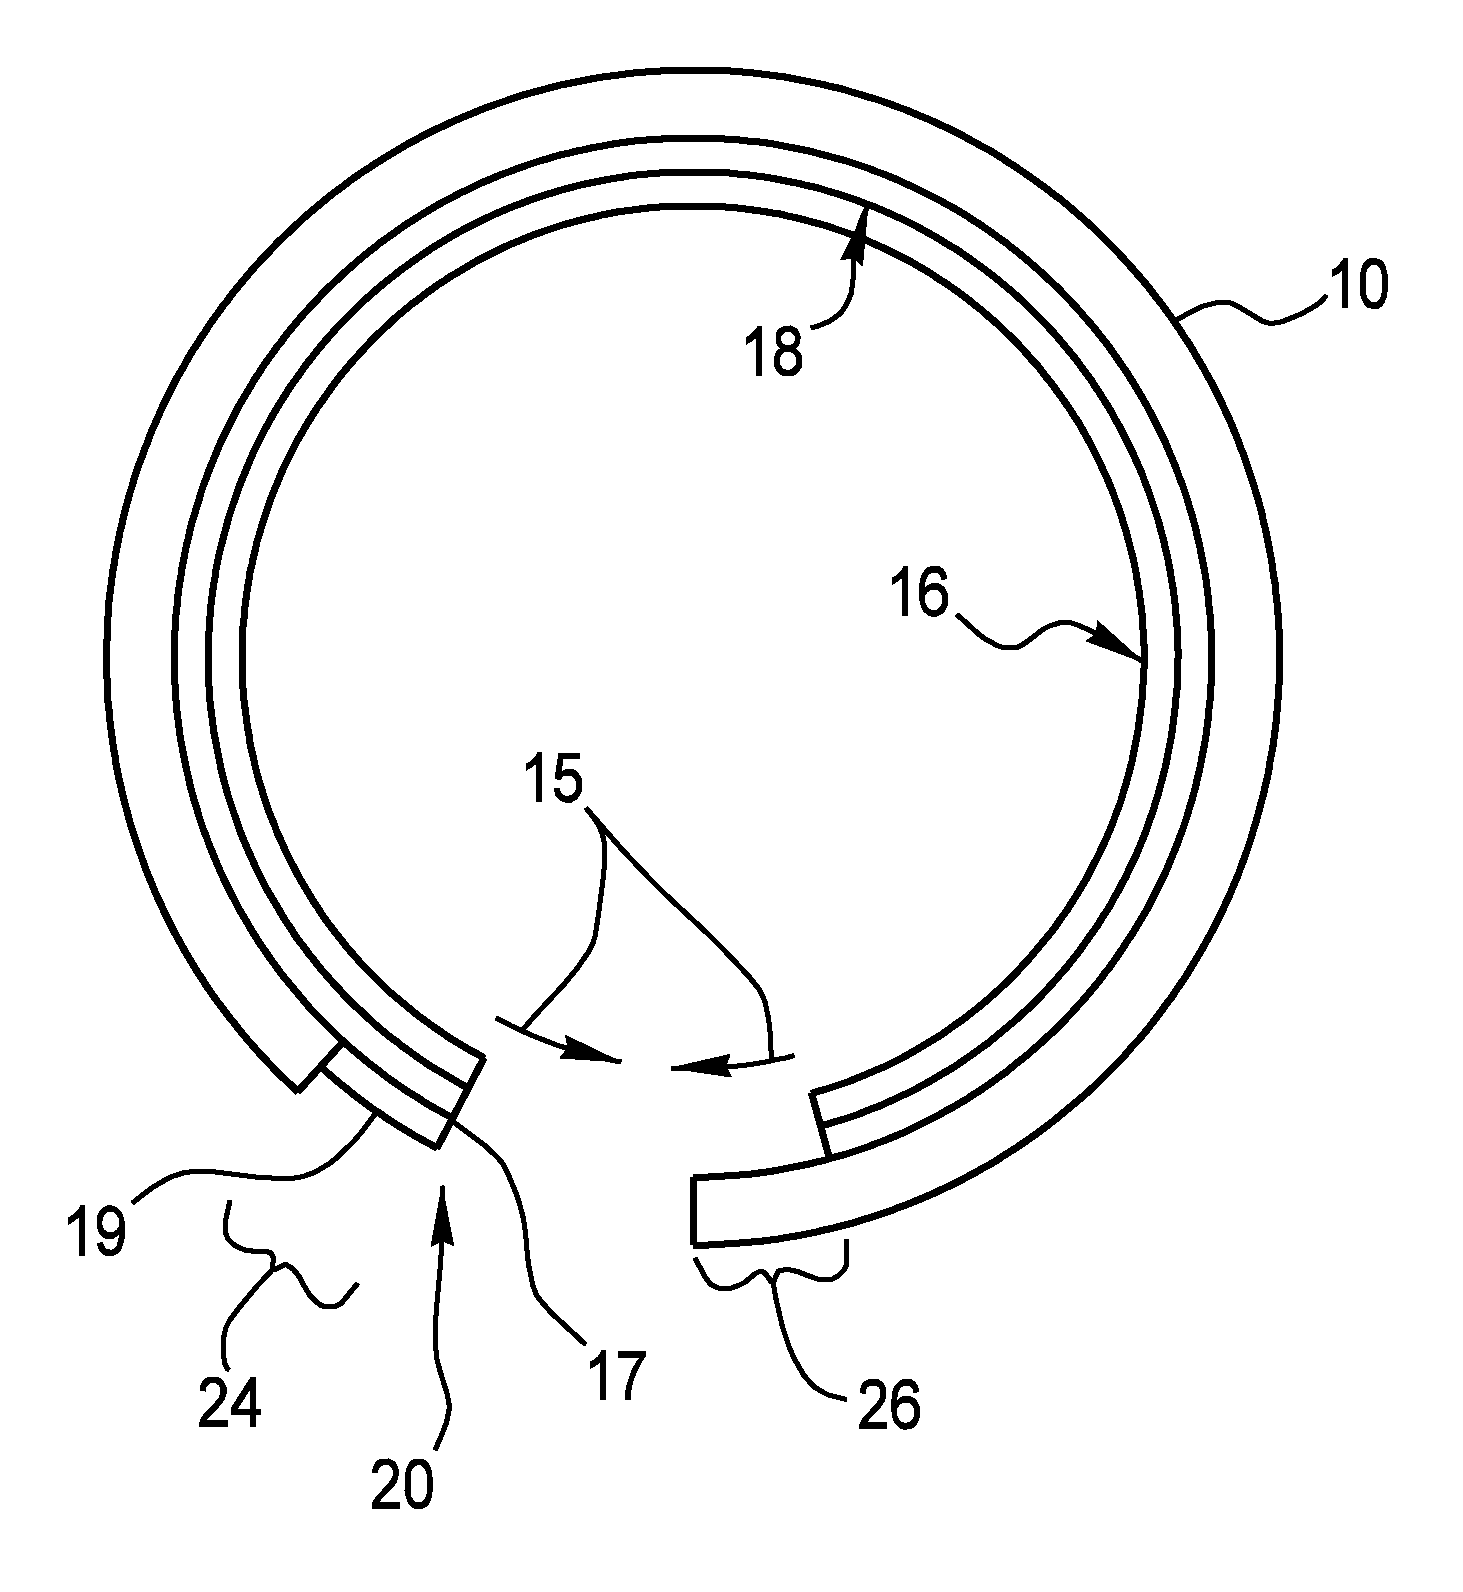 System and method for mounting a plate to an adhesive member